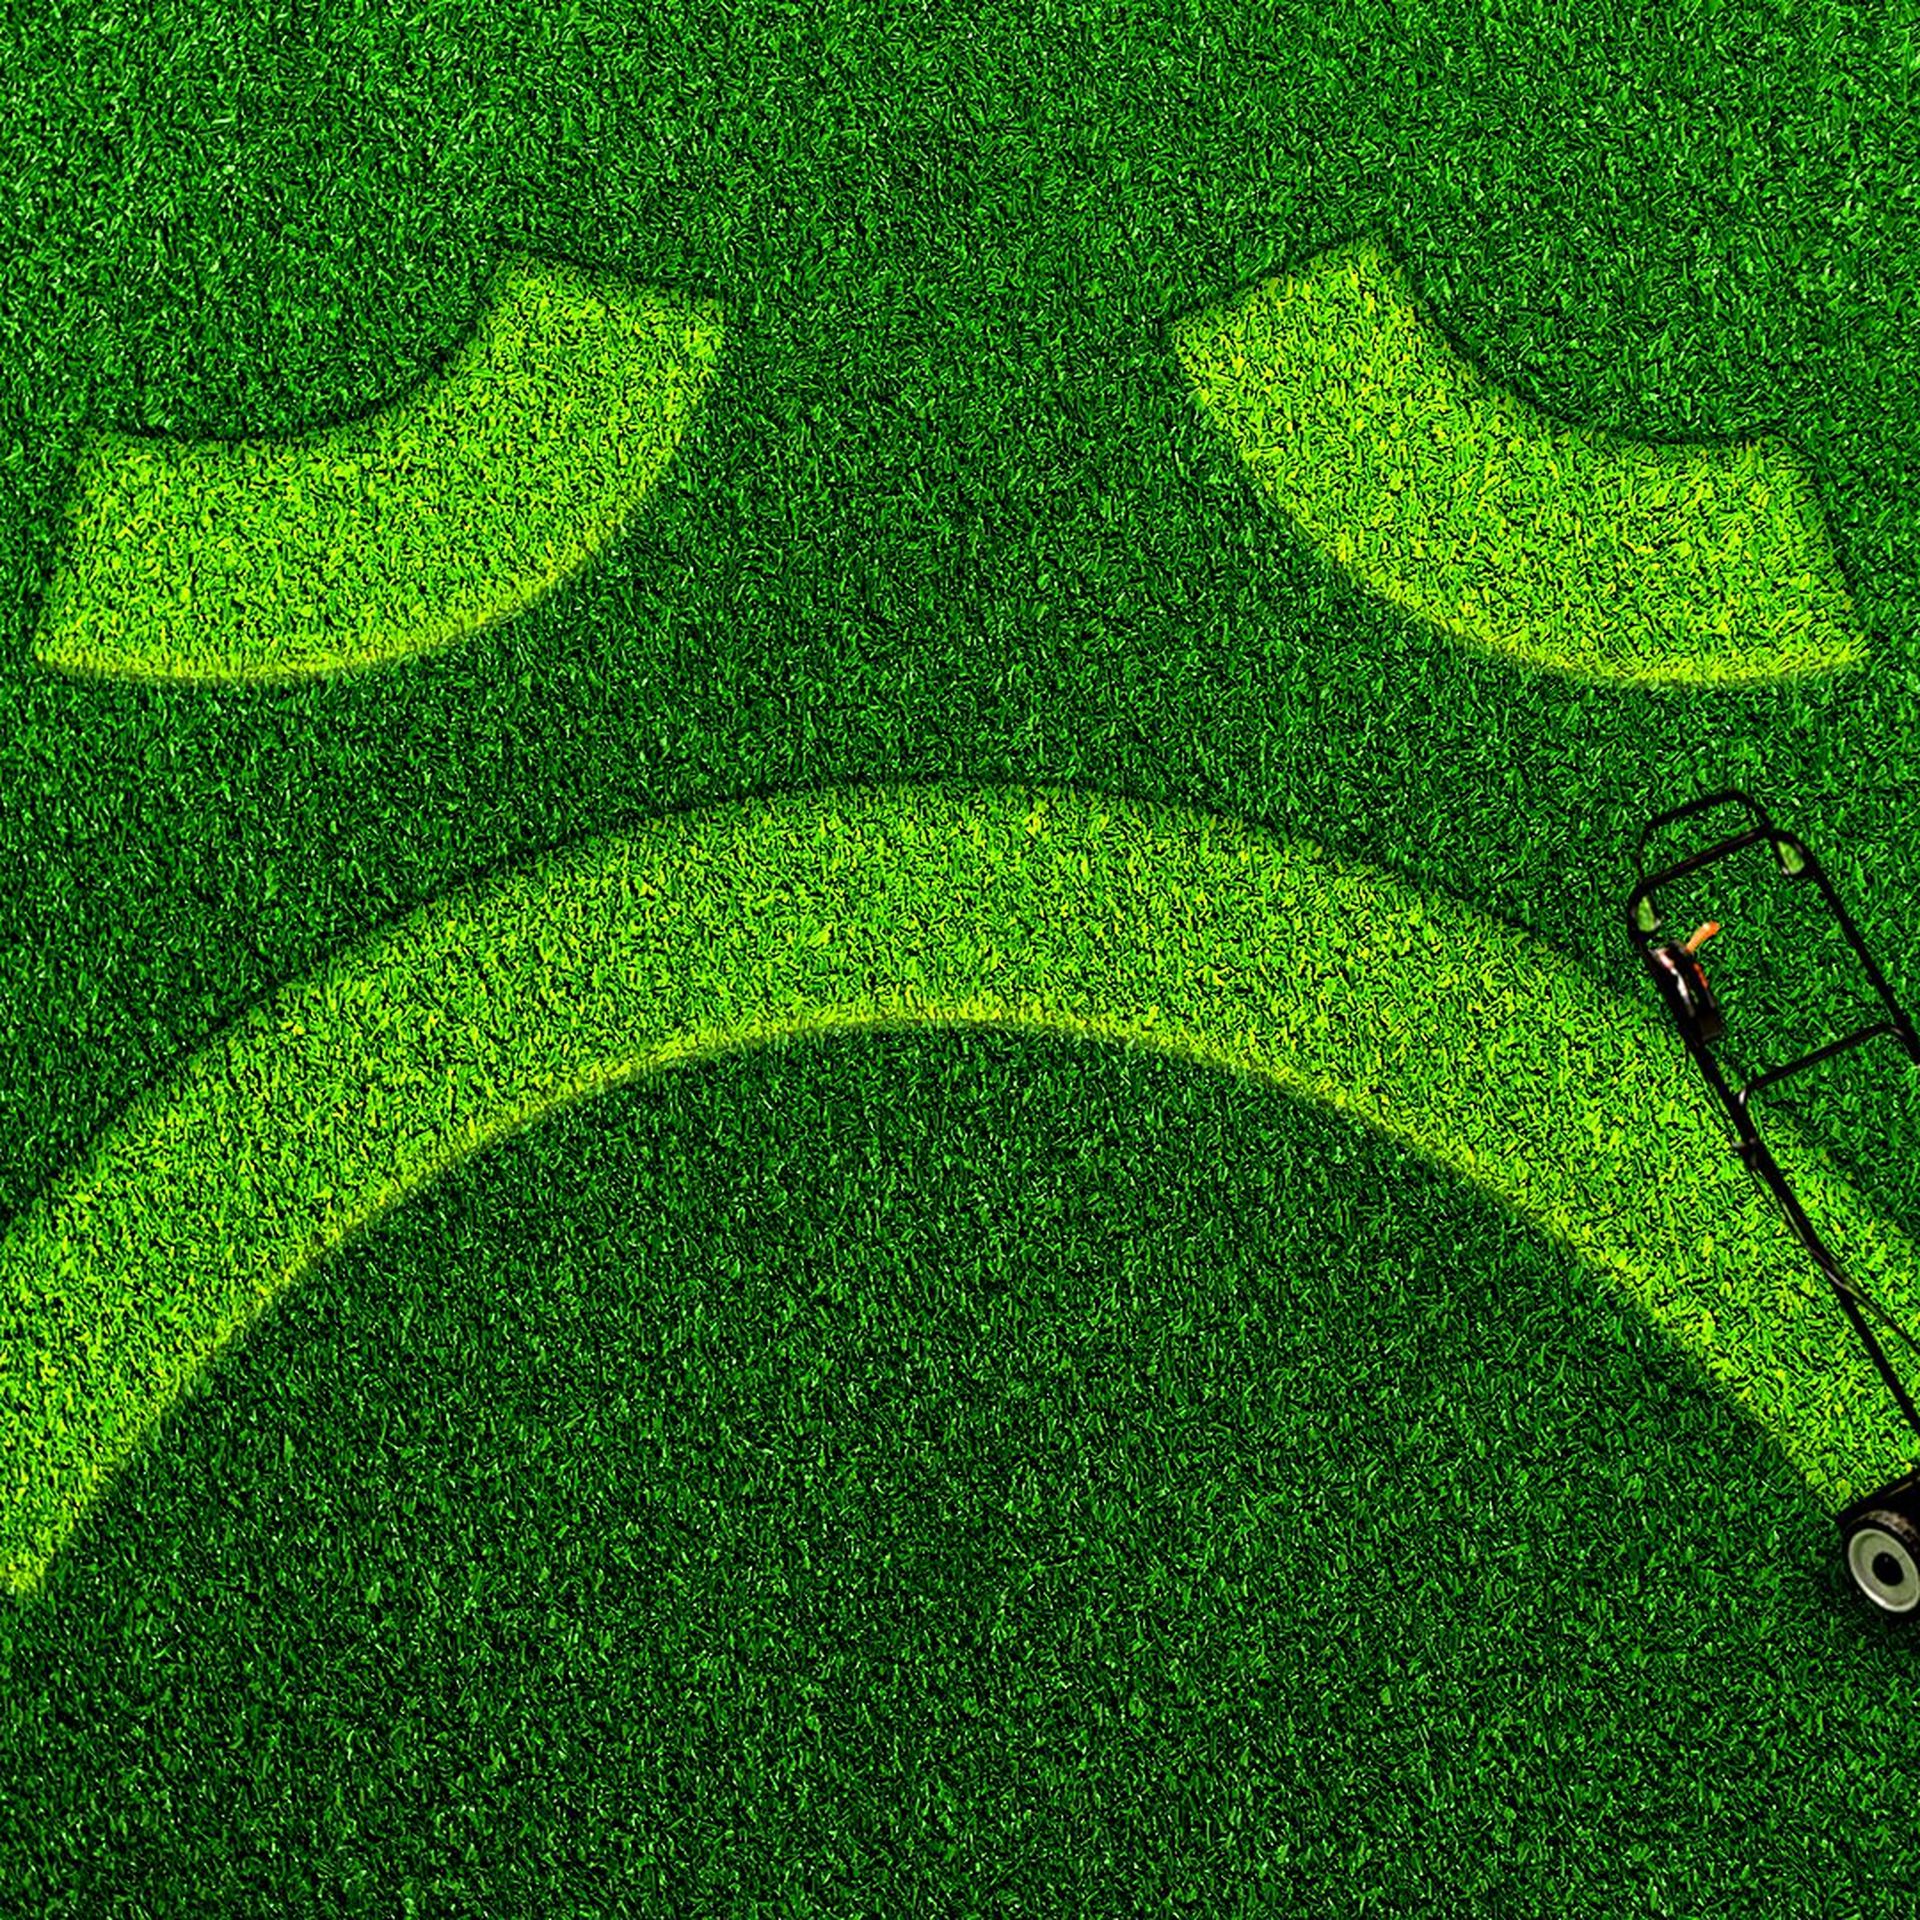 Illustration of a lawn mower next to cut grass forming the shape of a sad face